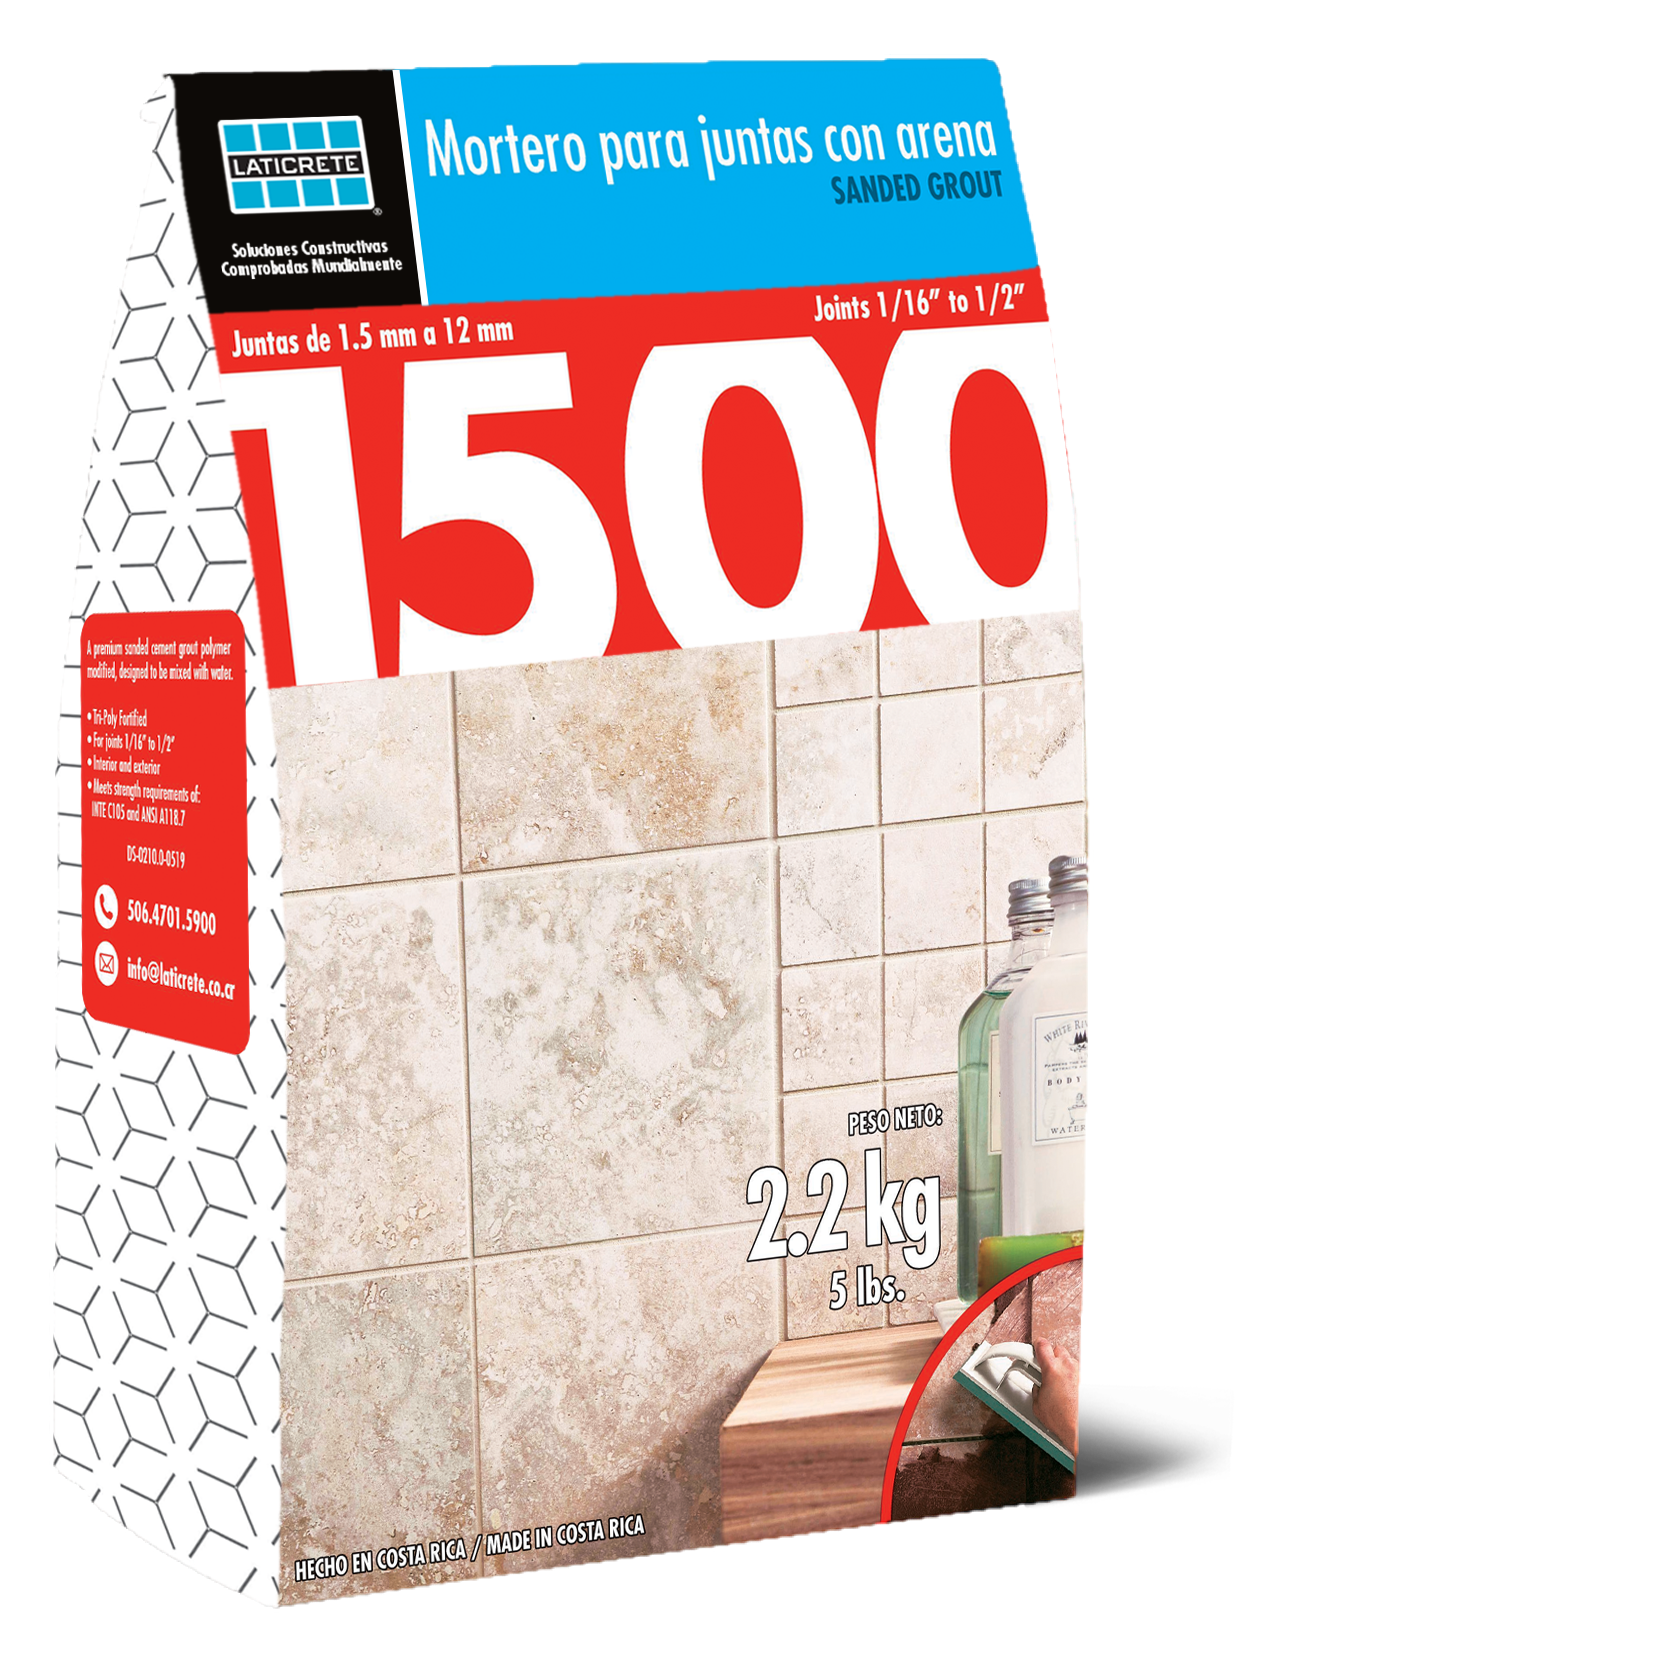 1500 Sanded Grout